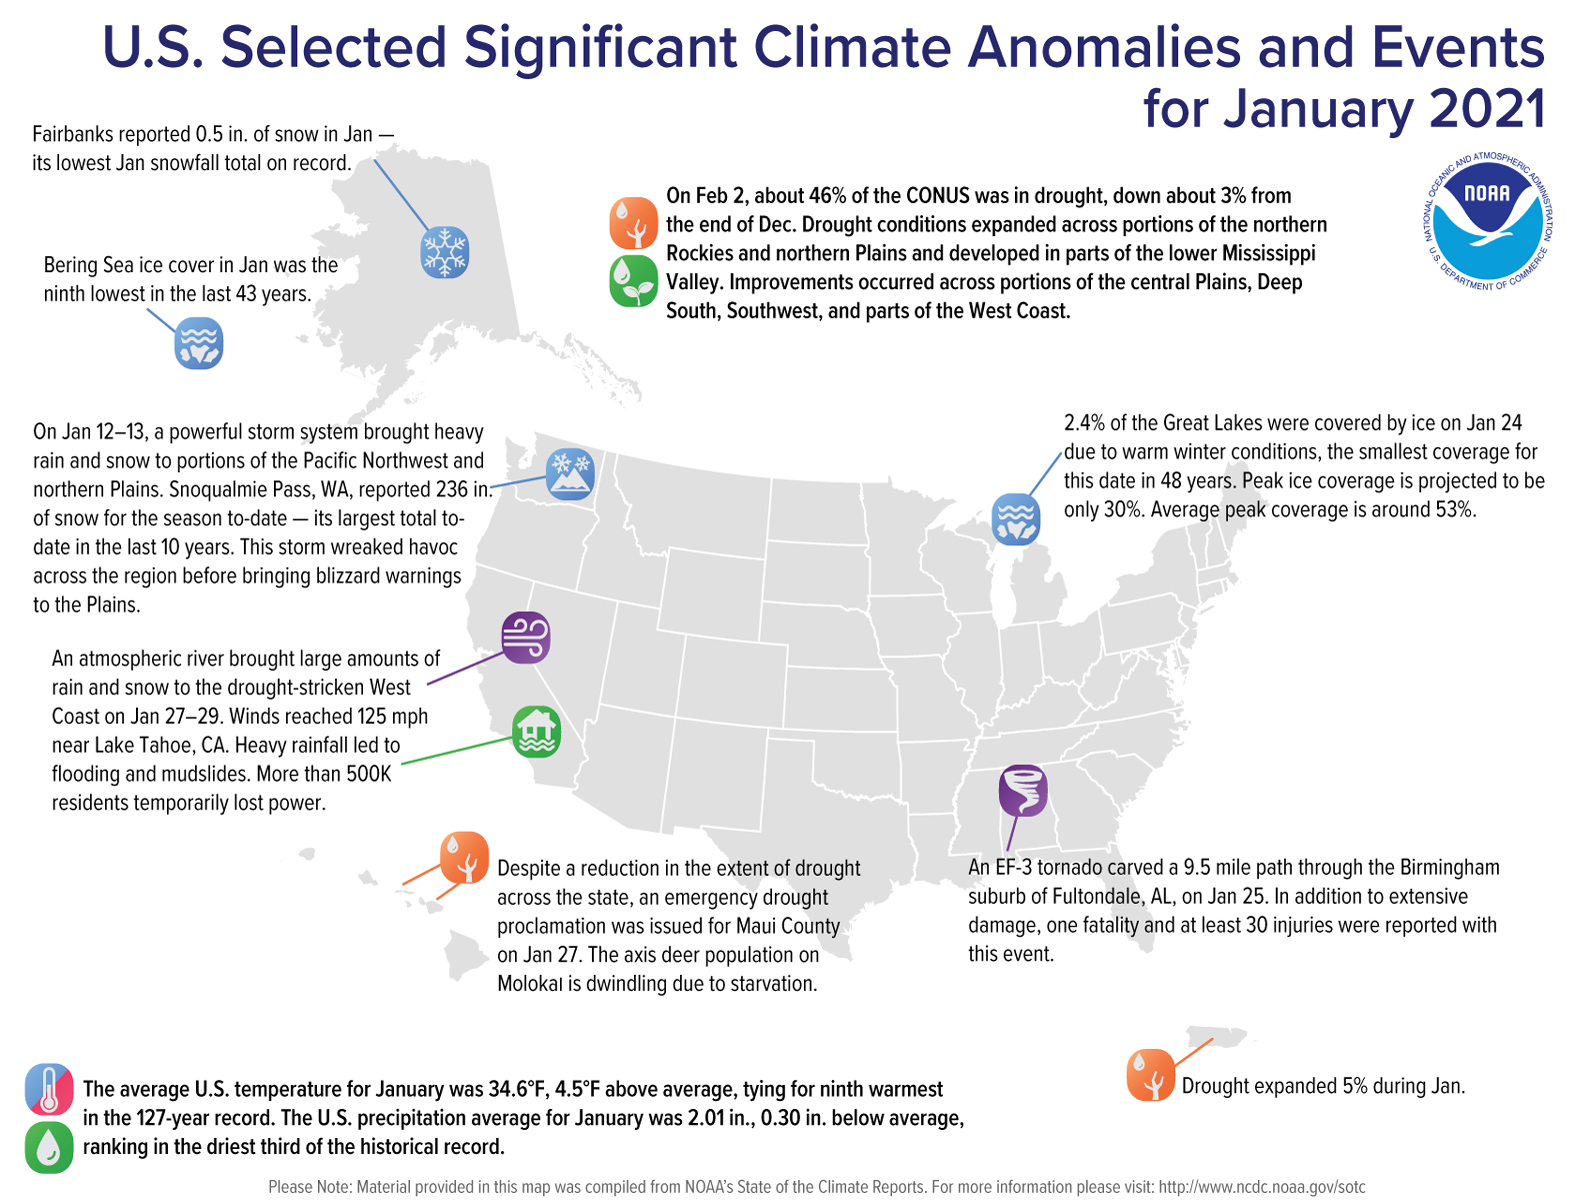 A map of the United States plotted with significant climate events that occurred during January 2021. Please see article text below as well as the full climate report highlights at http://bit.ly/USClimate202101.